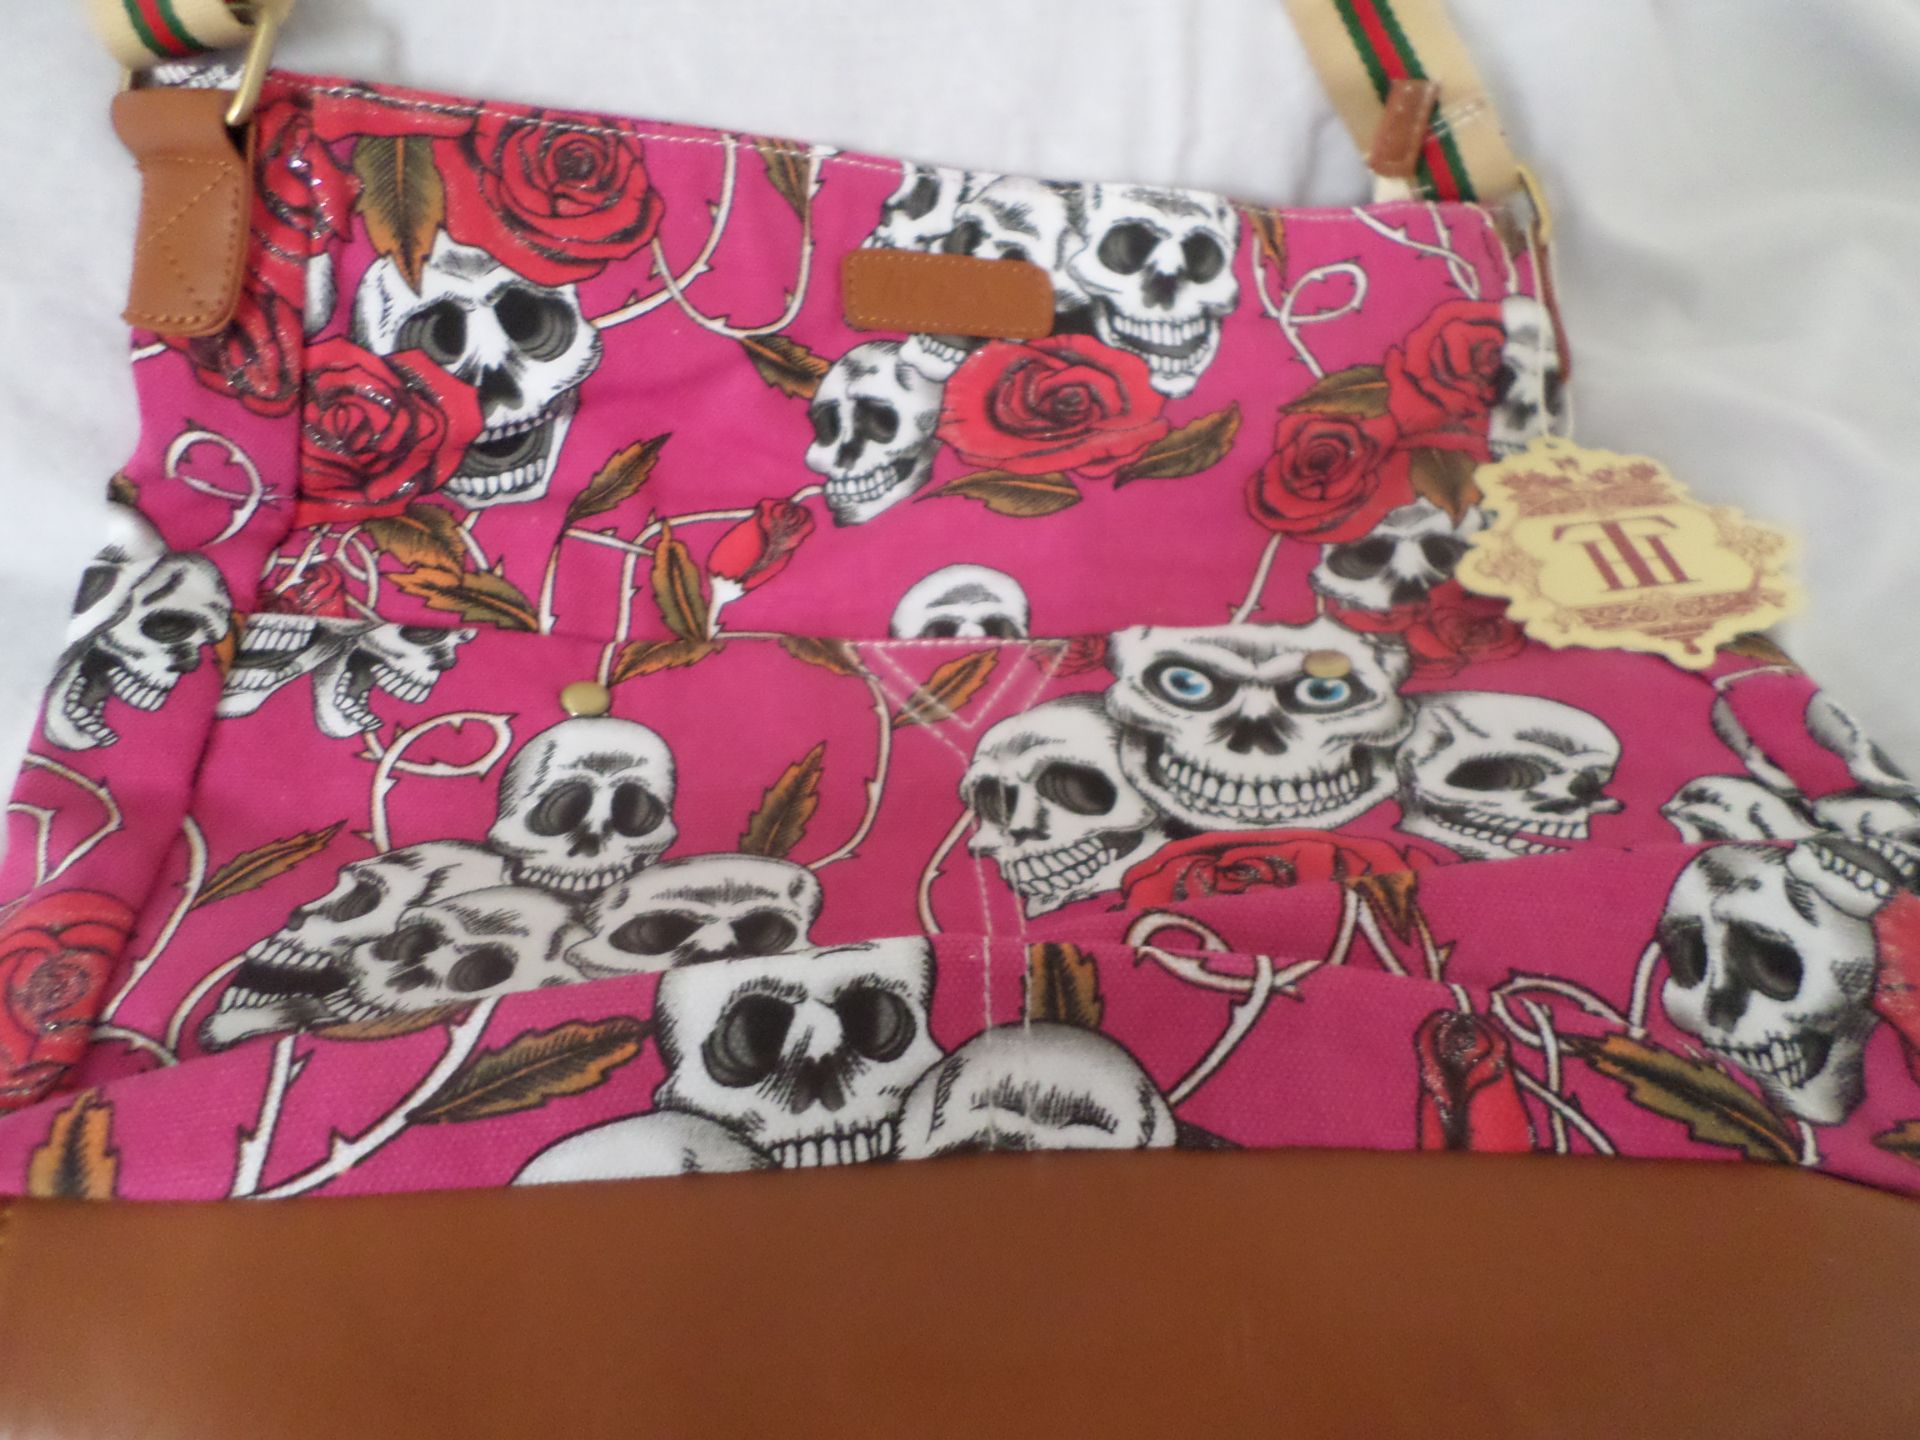 2 x HT London Large Shoulder/Tote Bags. Skull Design. Brand New. RRP £19.99 Each - Image 3 of 4